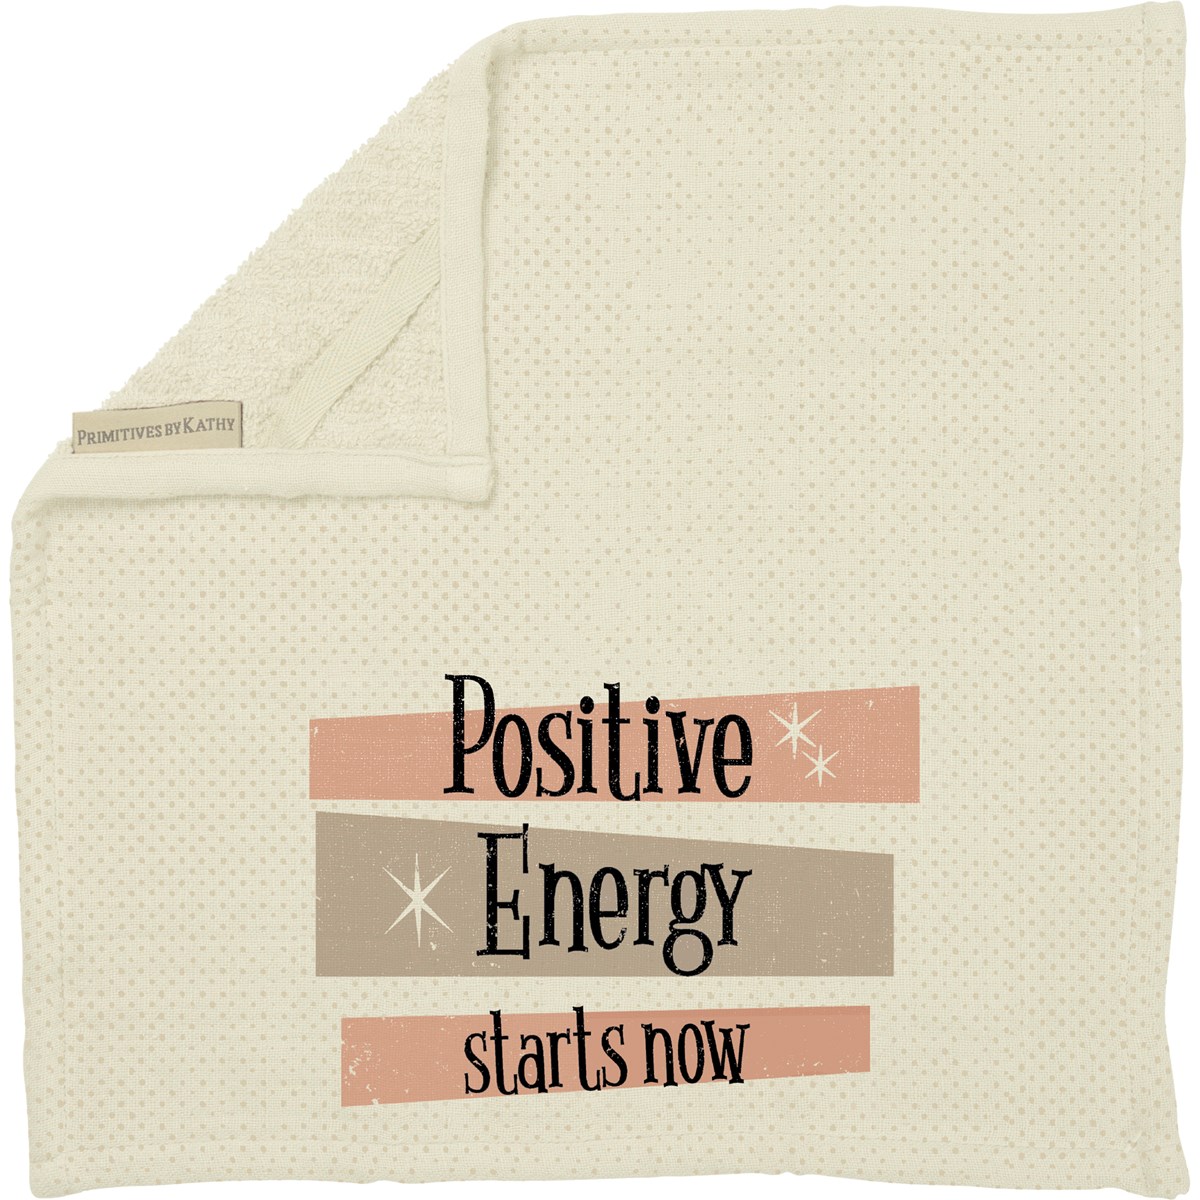 Positive Energy Starts Now Washcloth - Cotton, Terrycloth